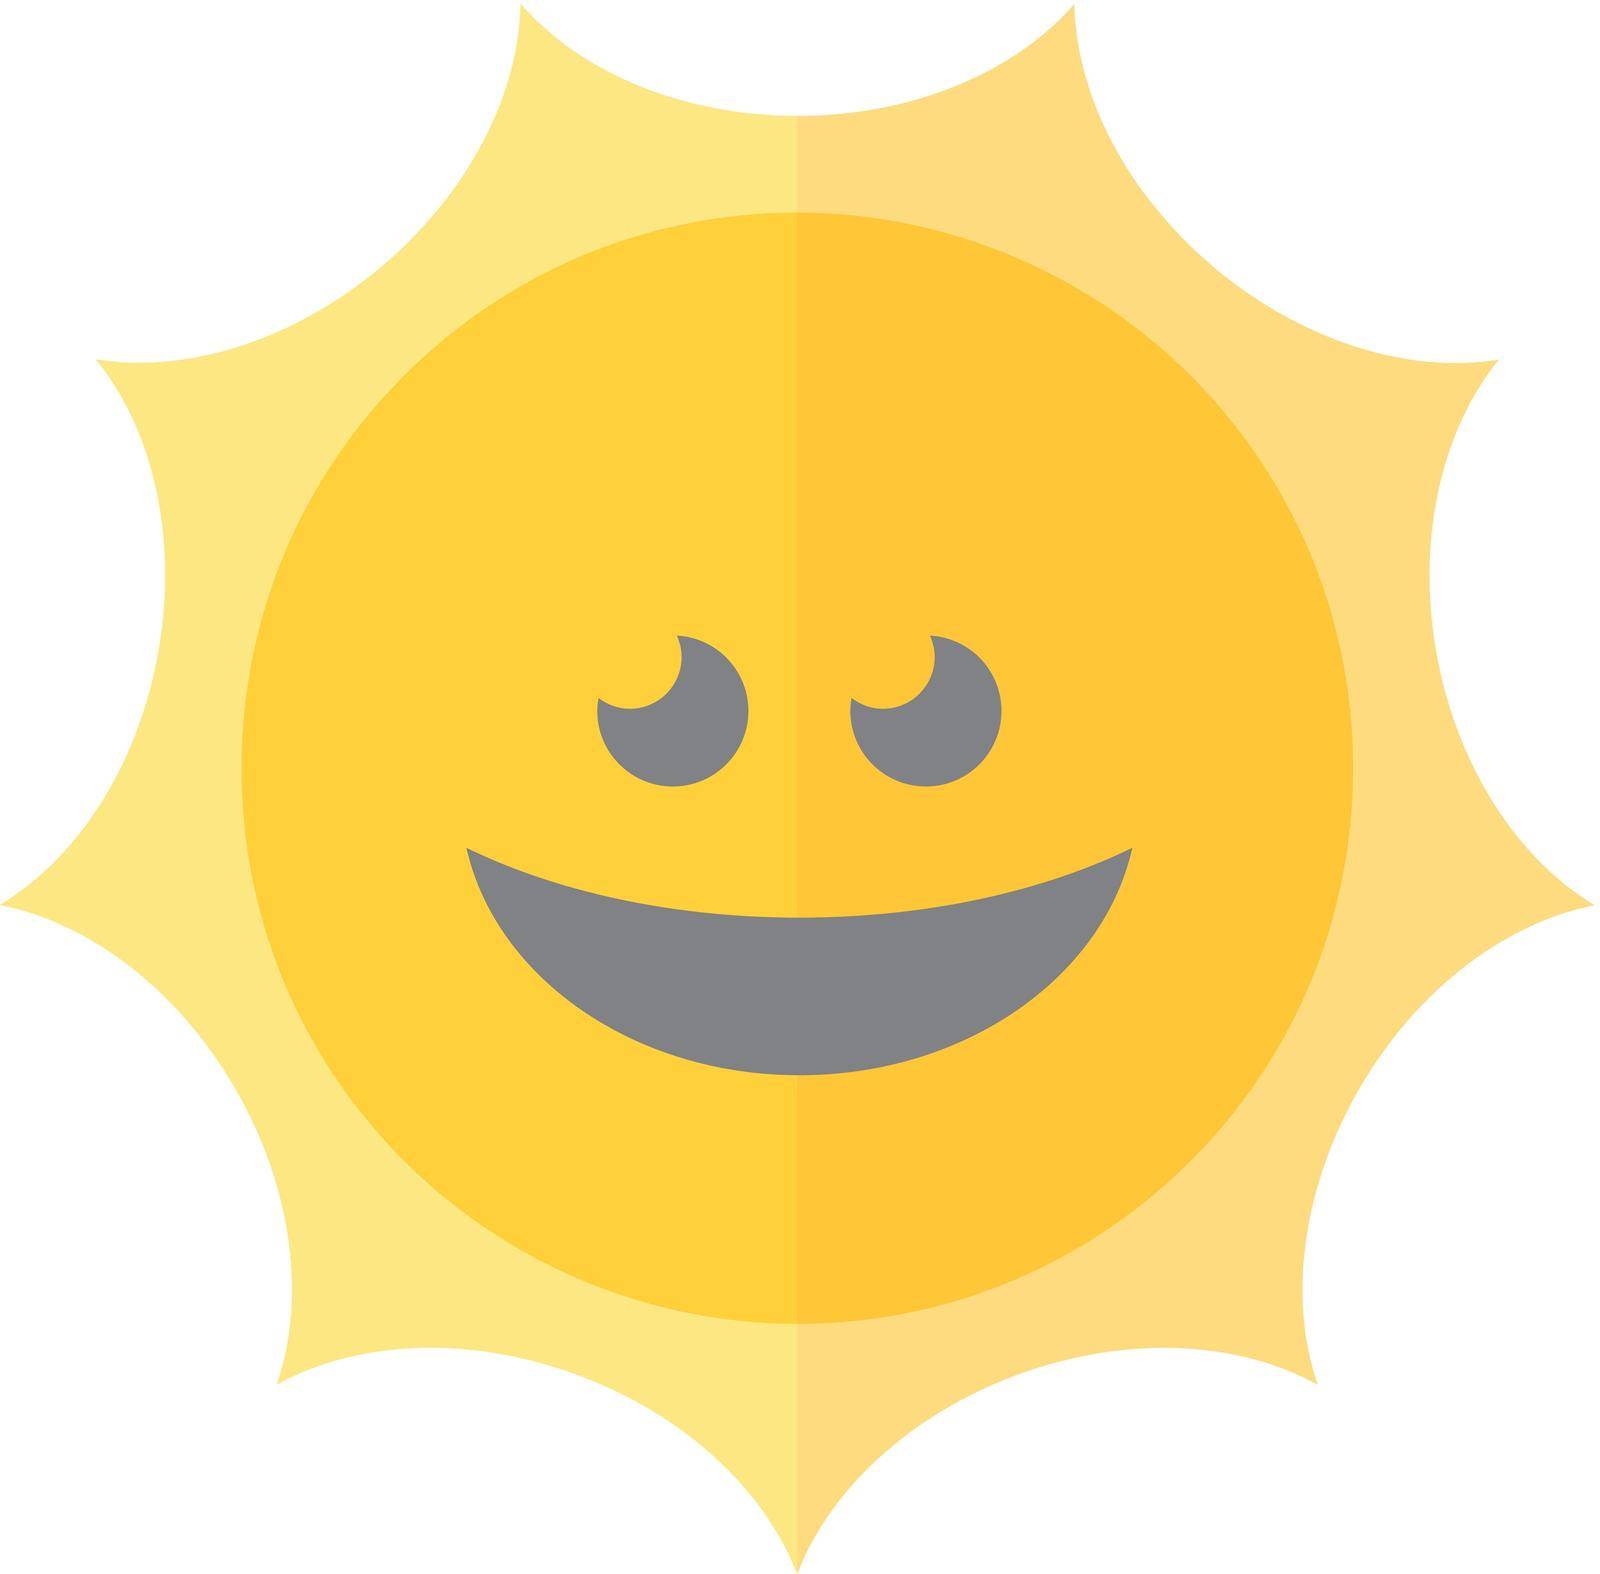 Weather forecast sunny icon in flat color style.